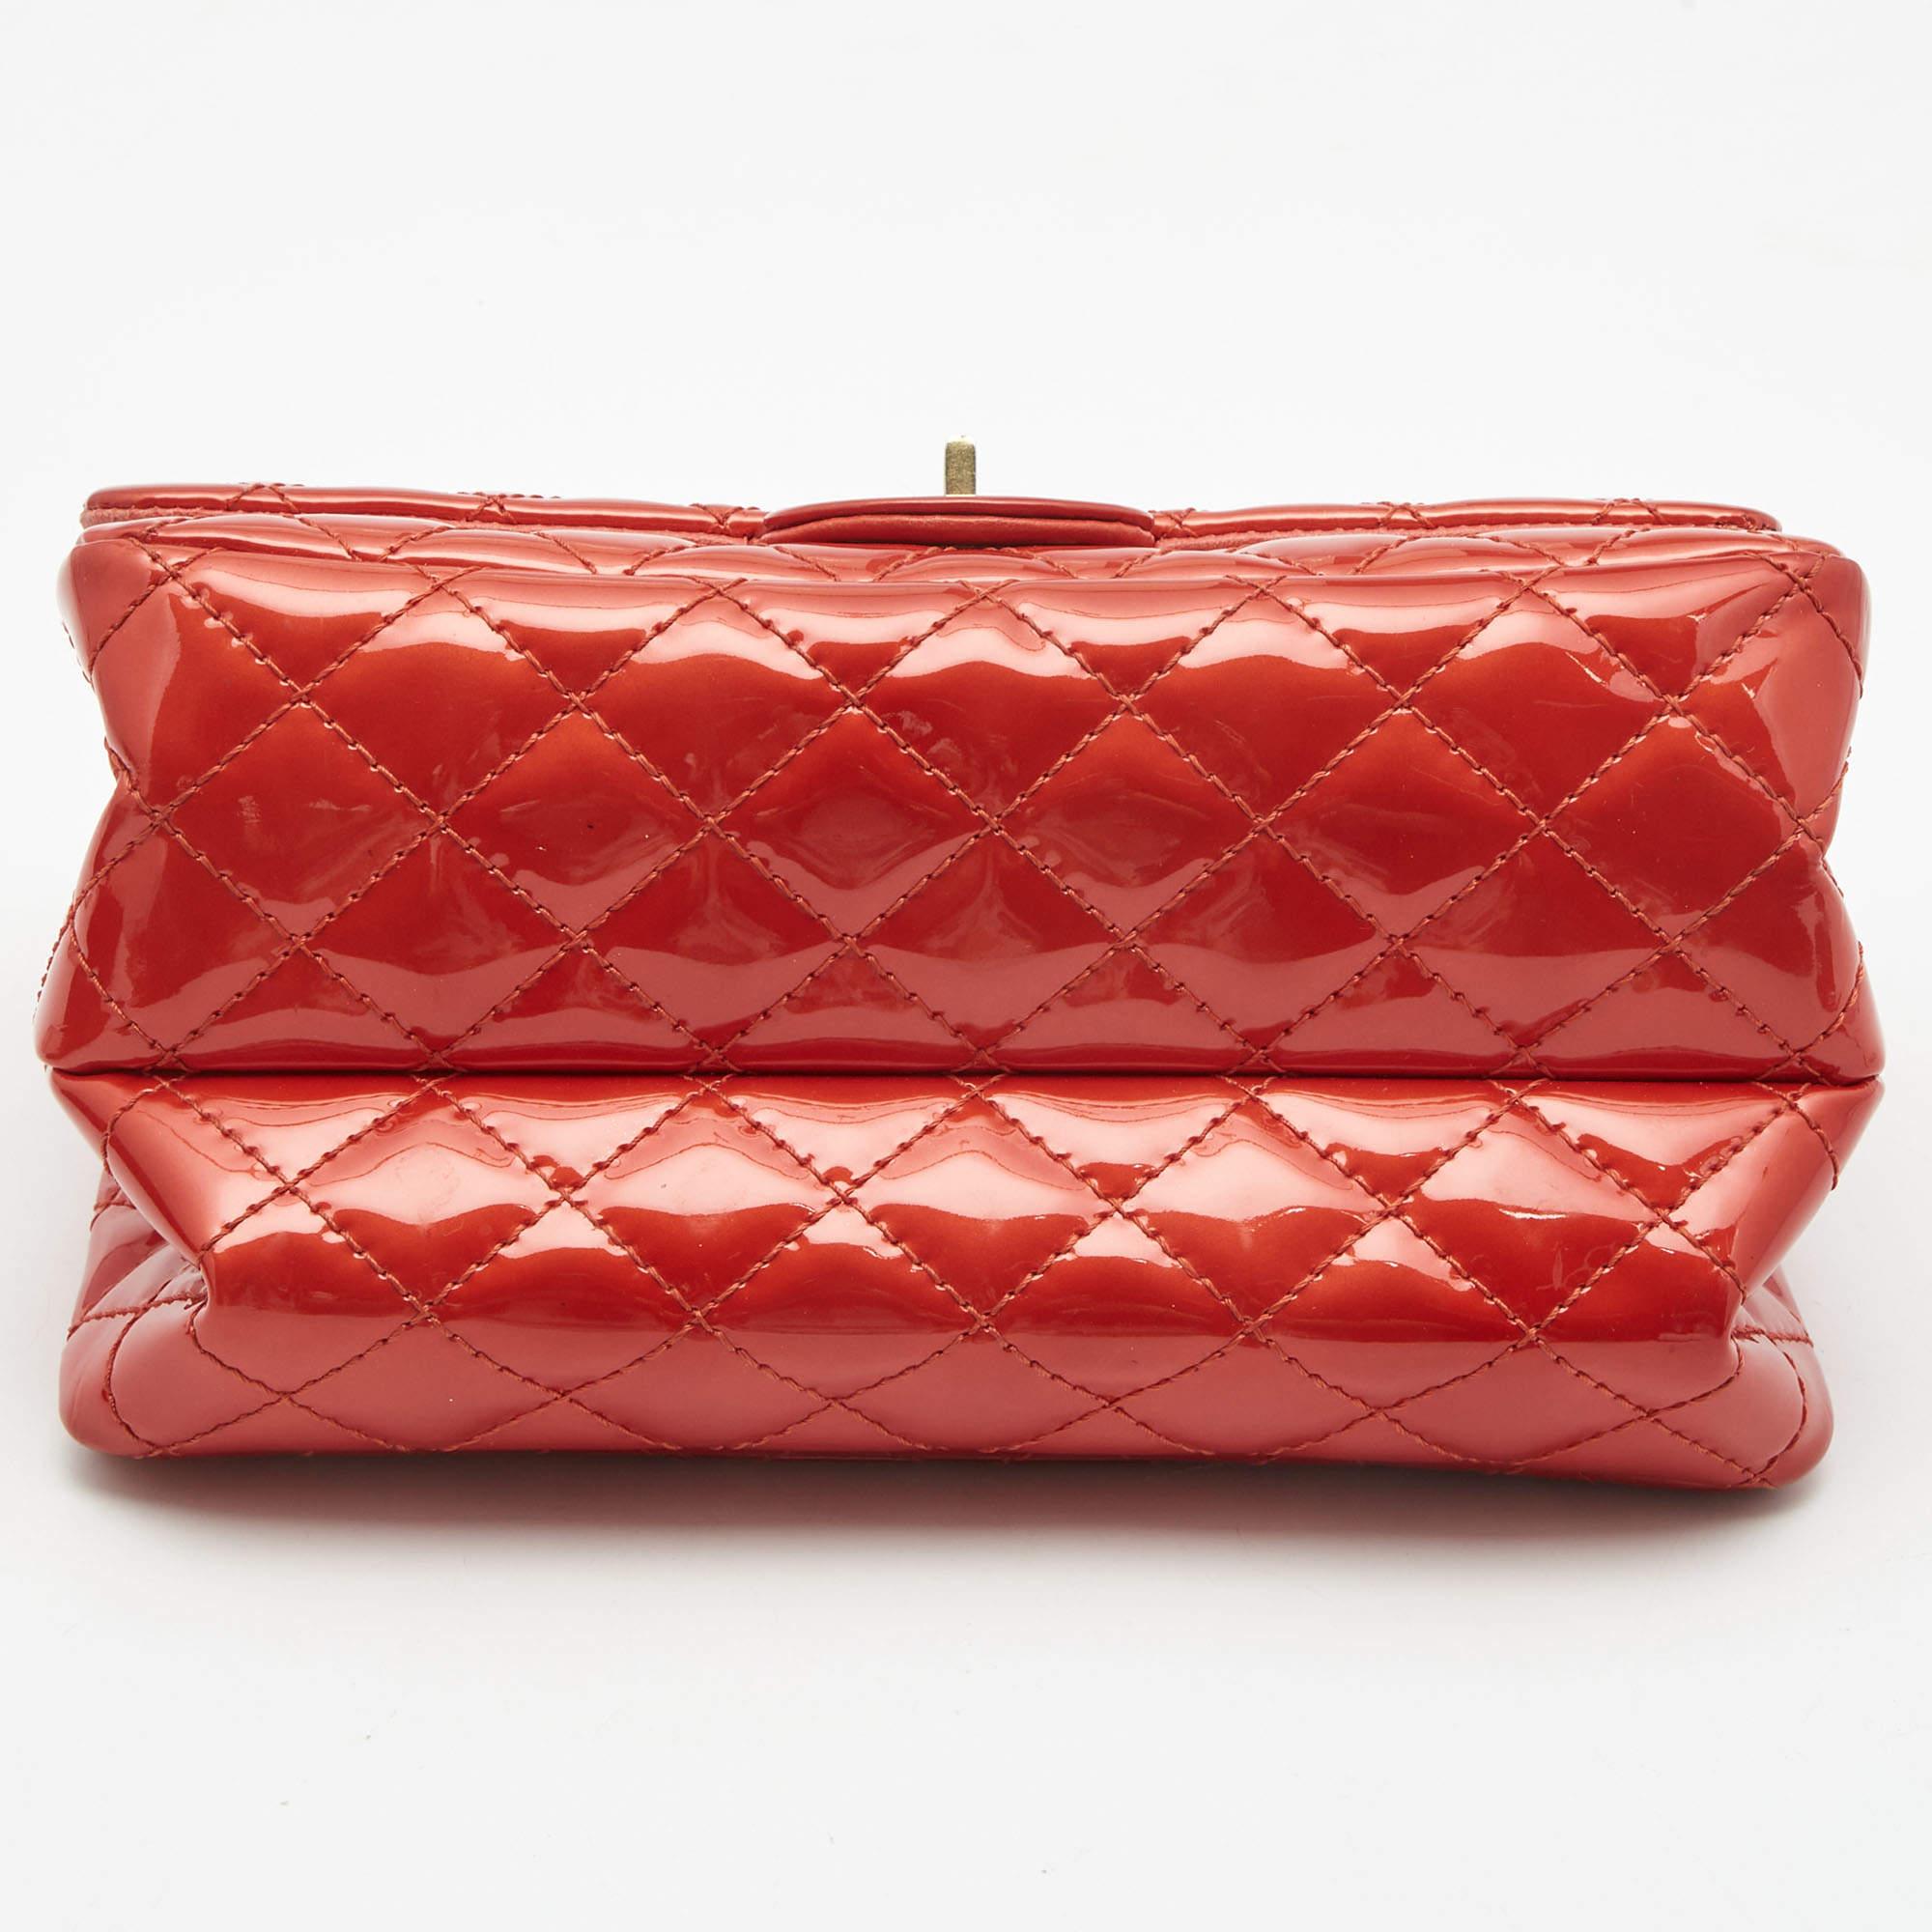 Women's Chanel Red Patent Leather Reissue Double Compartment Flap Bag For Sale